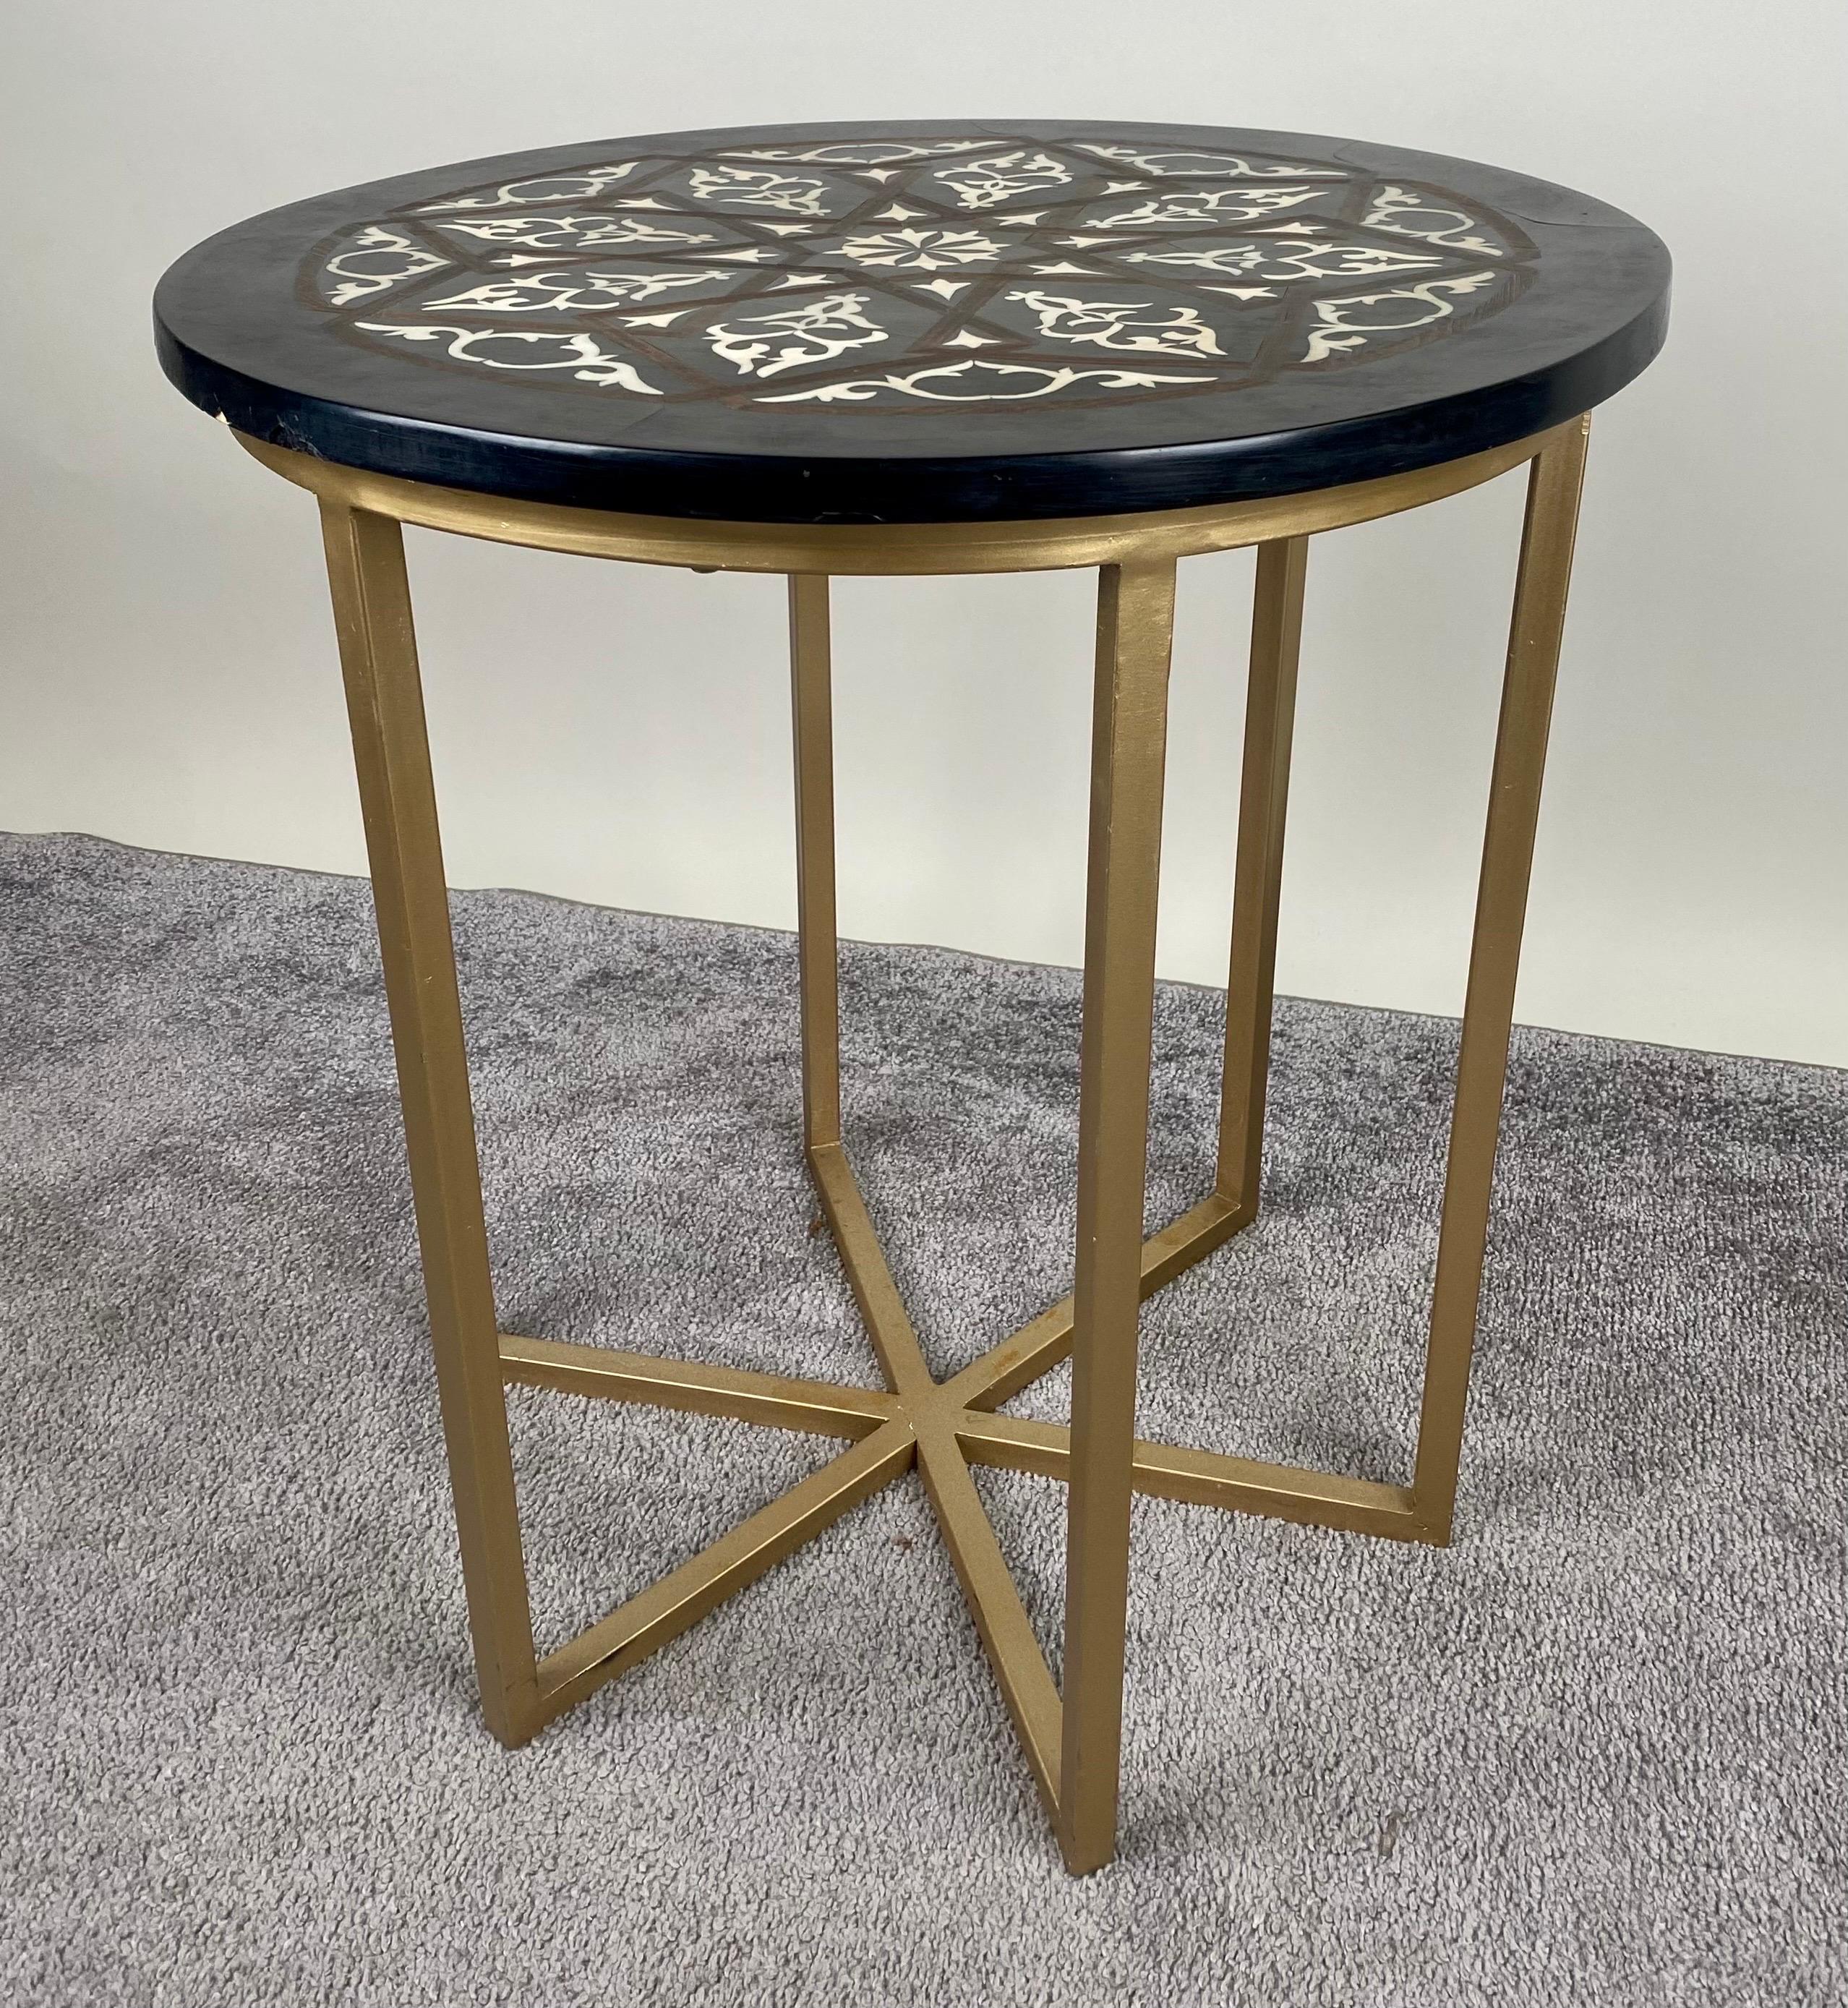 A beautiful Boho Chic round side or end table. The handmade table features  a round black top made of resin and embellished with geometrical motifs reminiscent of the timeless moorish design. The Top is raised by a six legs base made of brass.  The